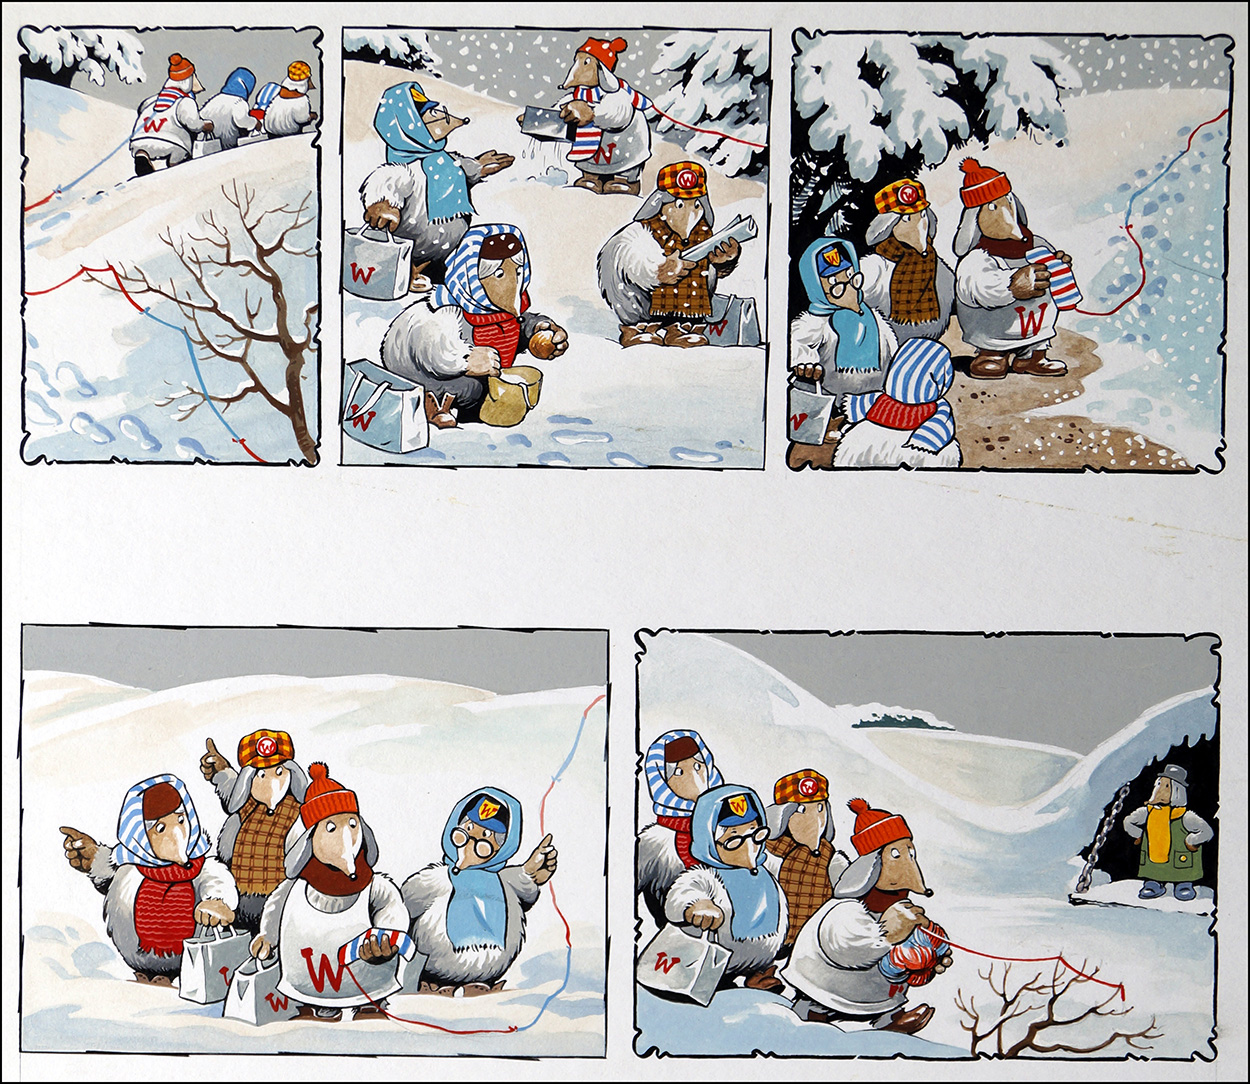 The Wombles - Winter Wilderness (Original) art by The Wombles (Blasco) Art at The Illustration Art Gallery